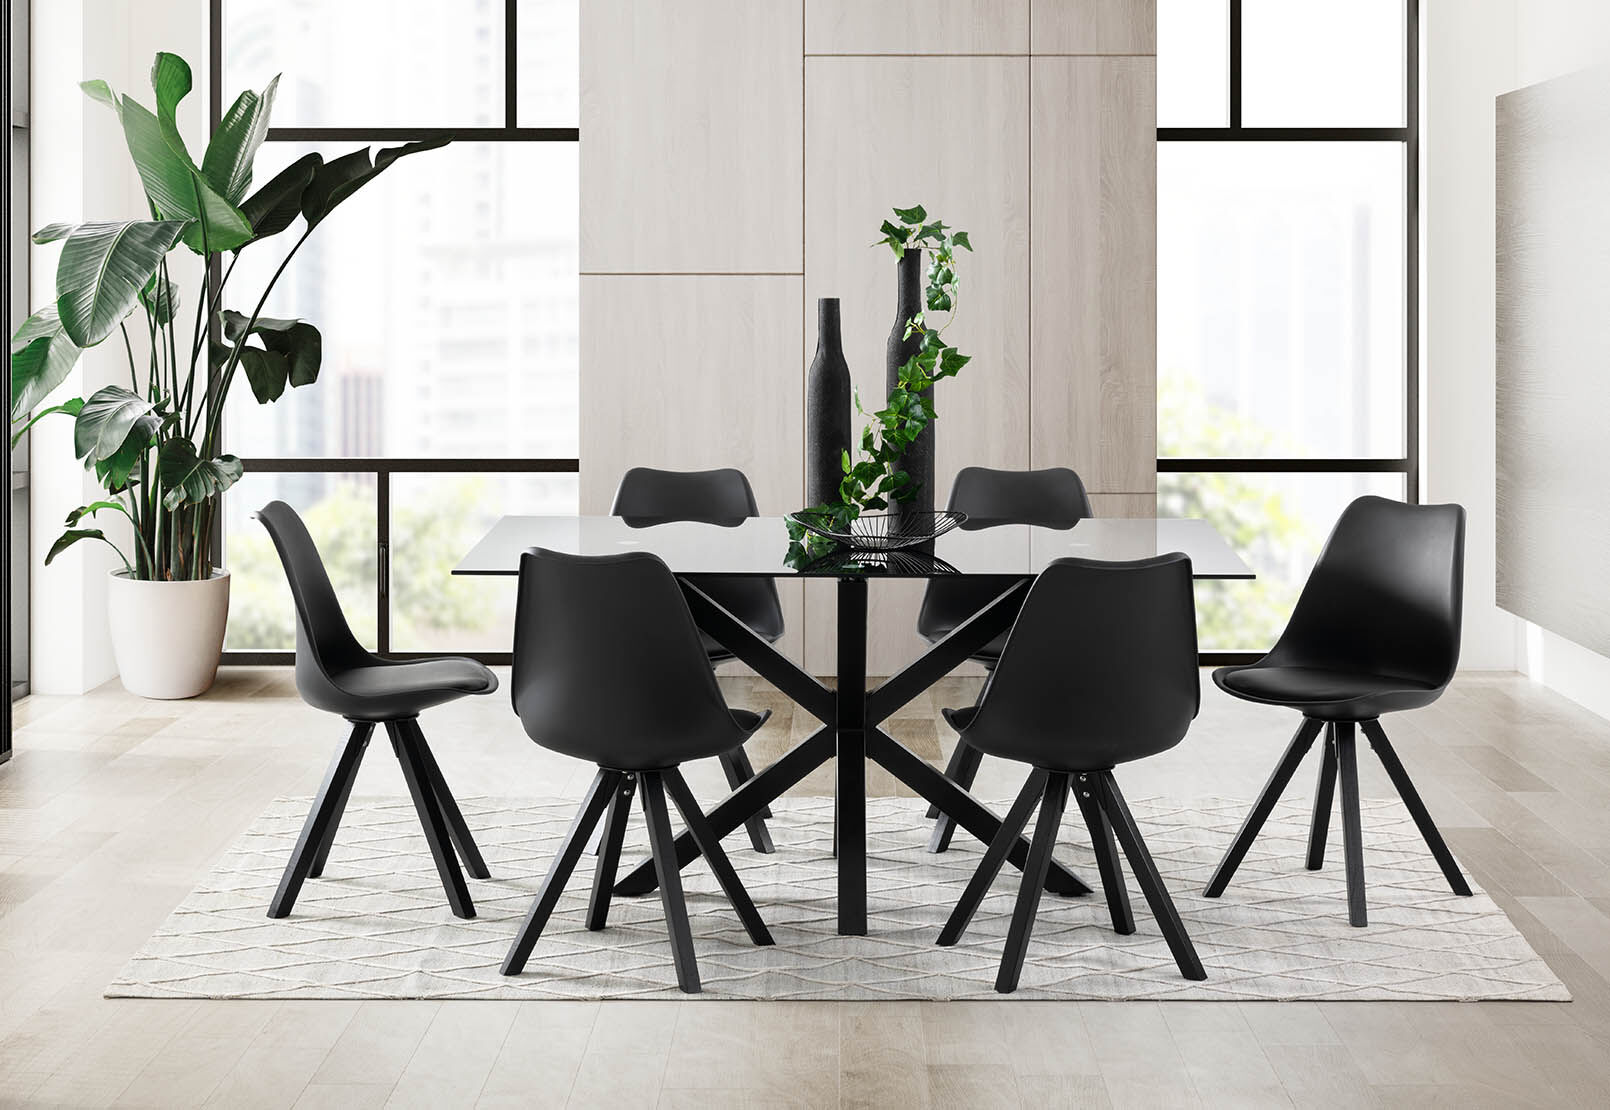 Black Table140cm + 6 Black Chair Dining Table and Chairs 6 Seater with Glass Room Leather Kitchen Furniture Set 